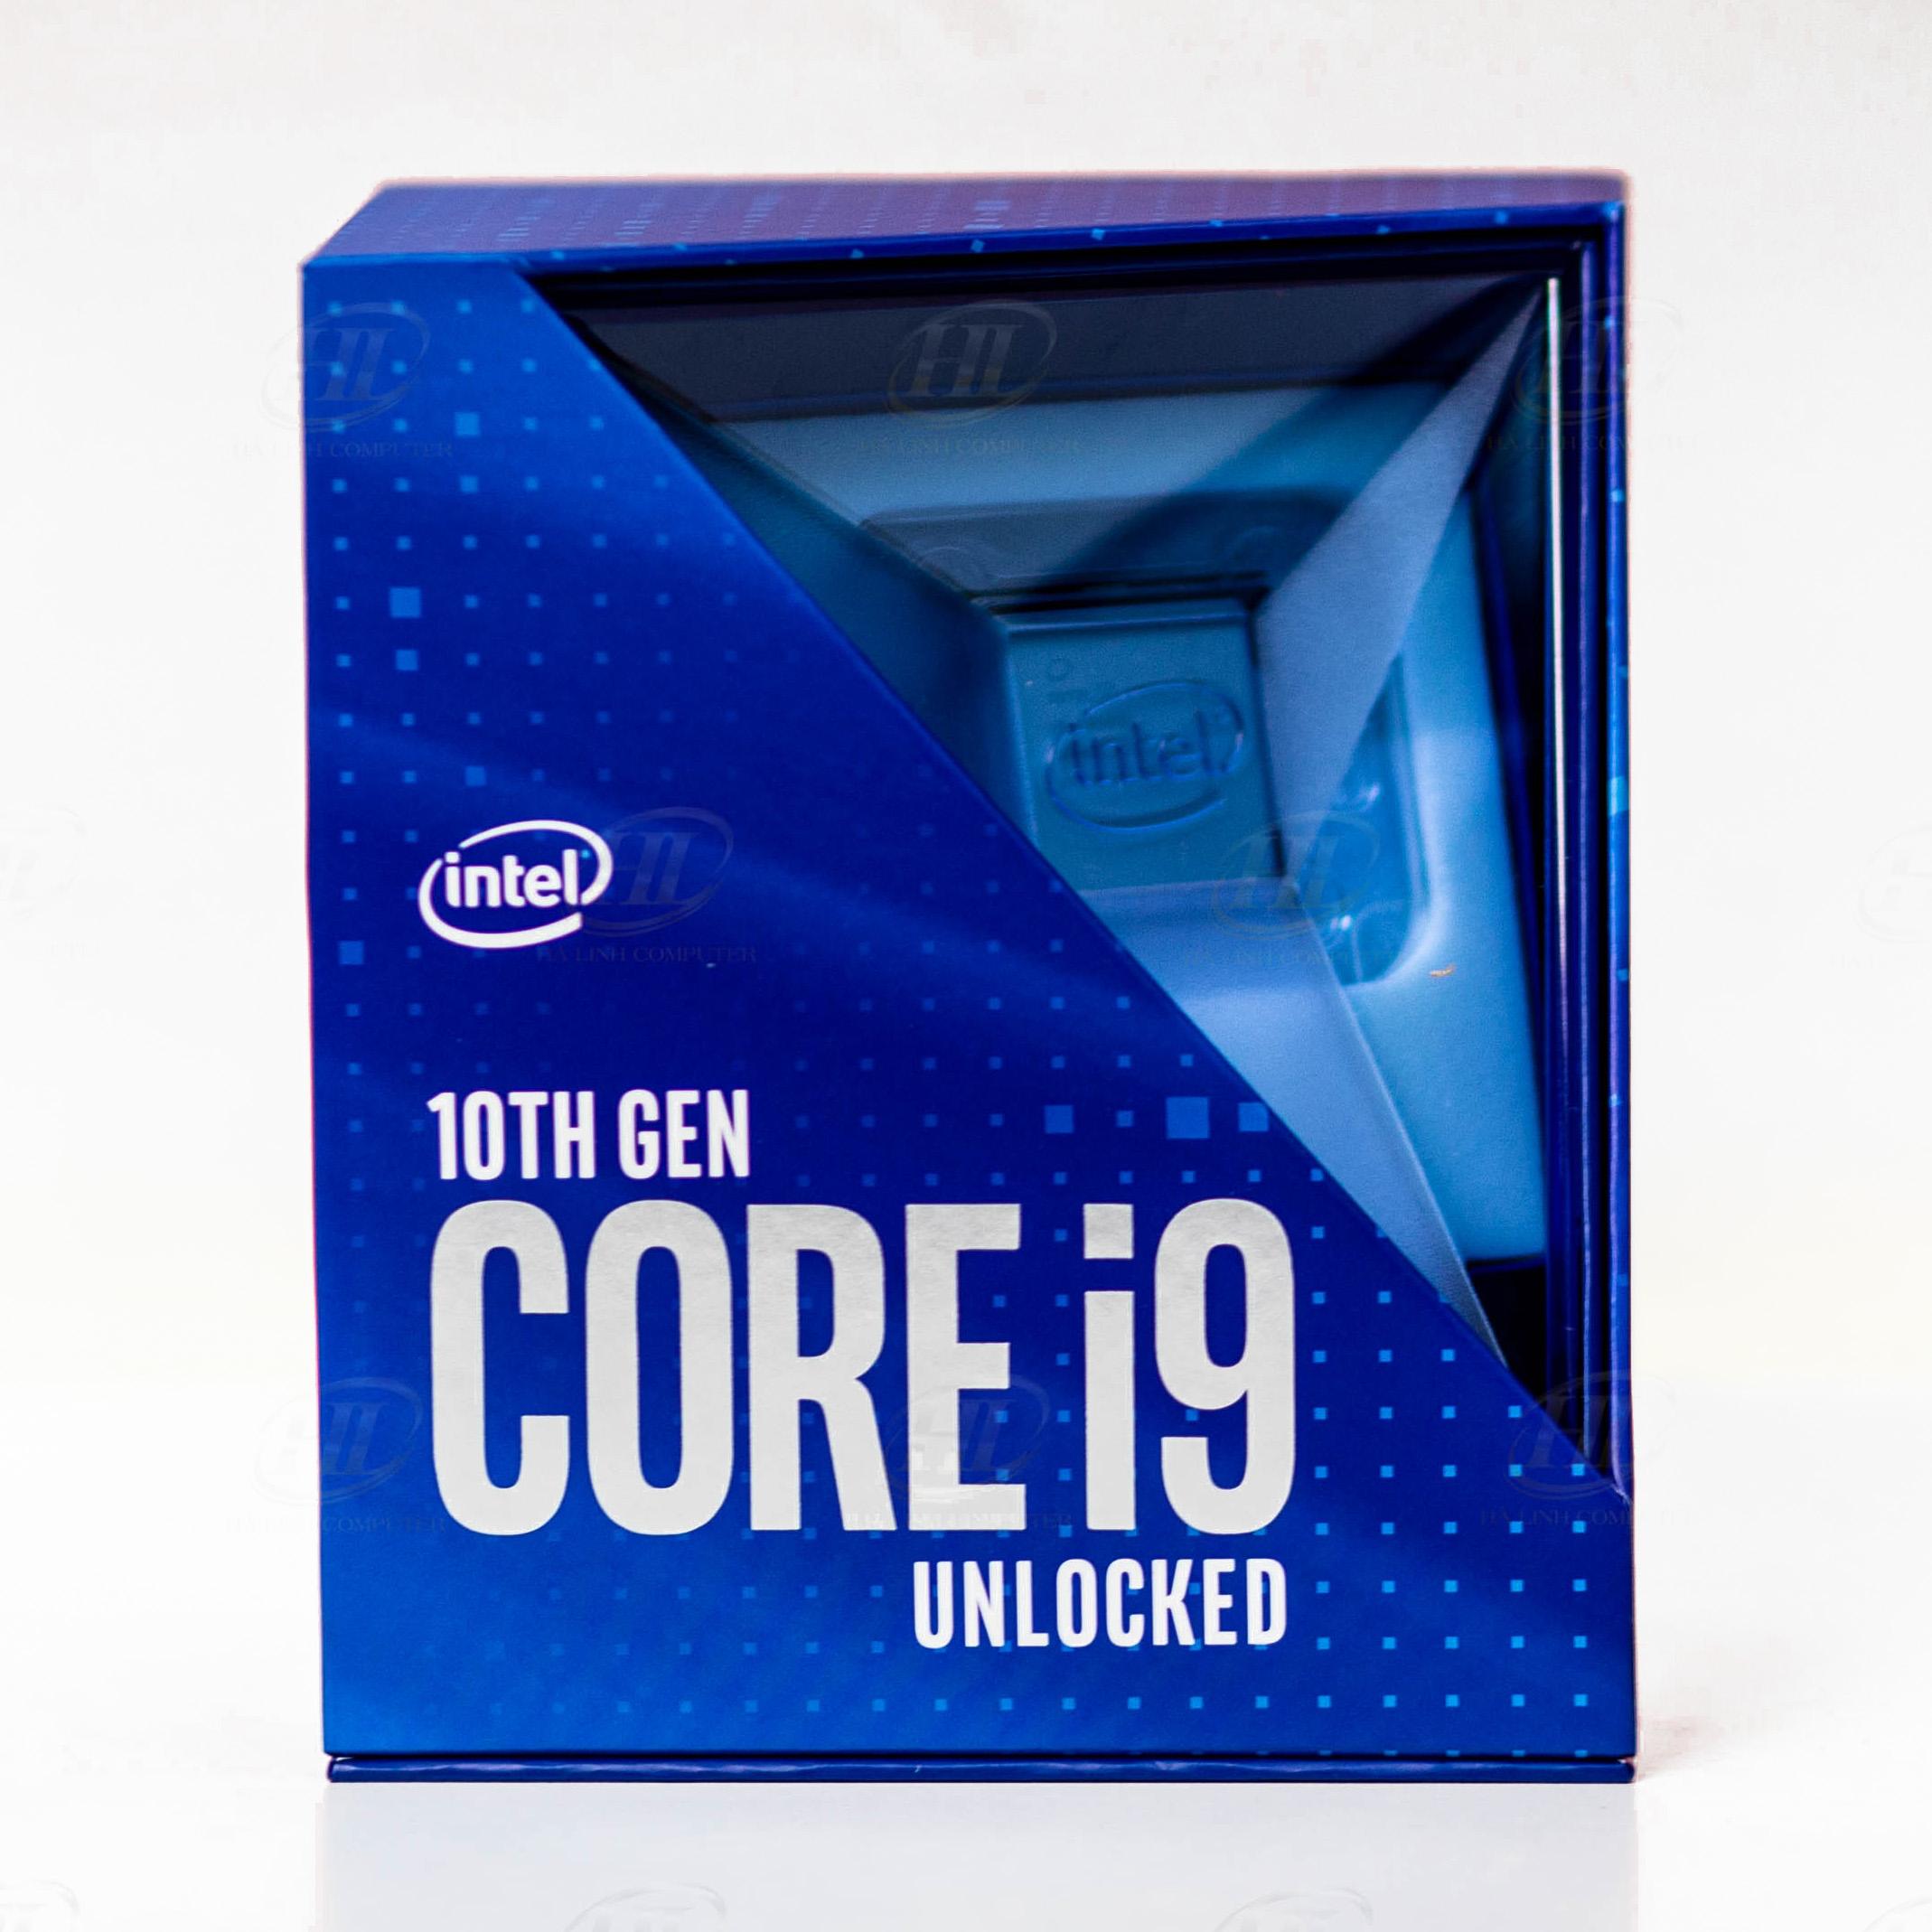 CPU Intel Core i9 10900K (3.7GHz turbo up to 5.3GHz, 10 core 20 Threads , 20MB Cache, 125W)